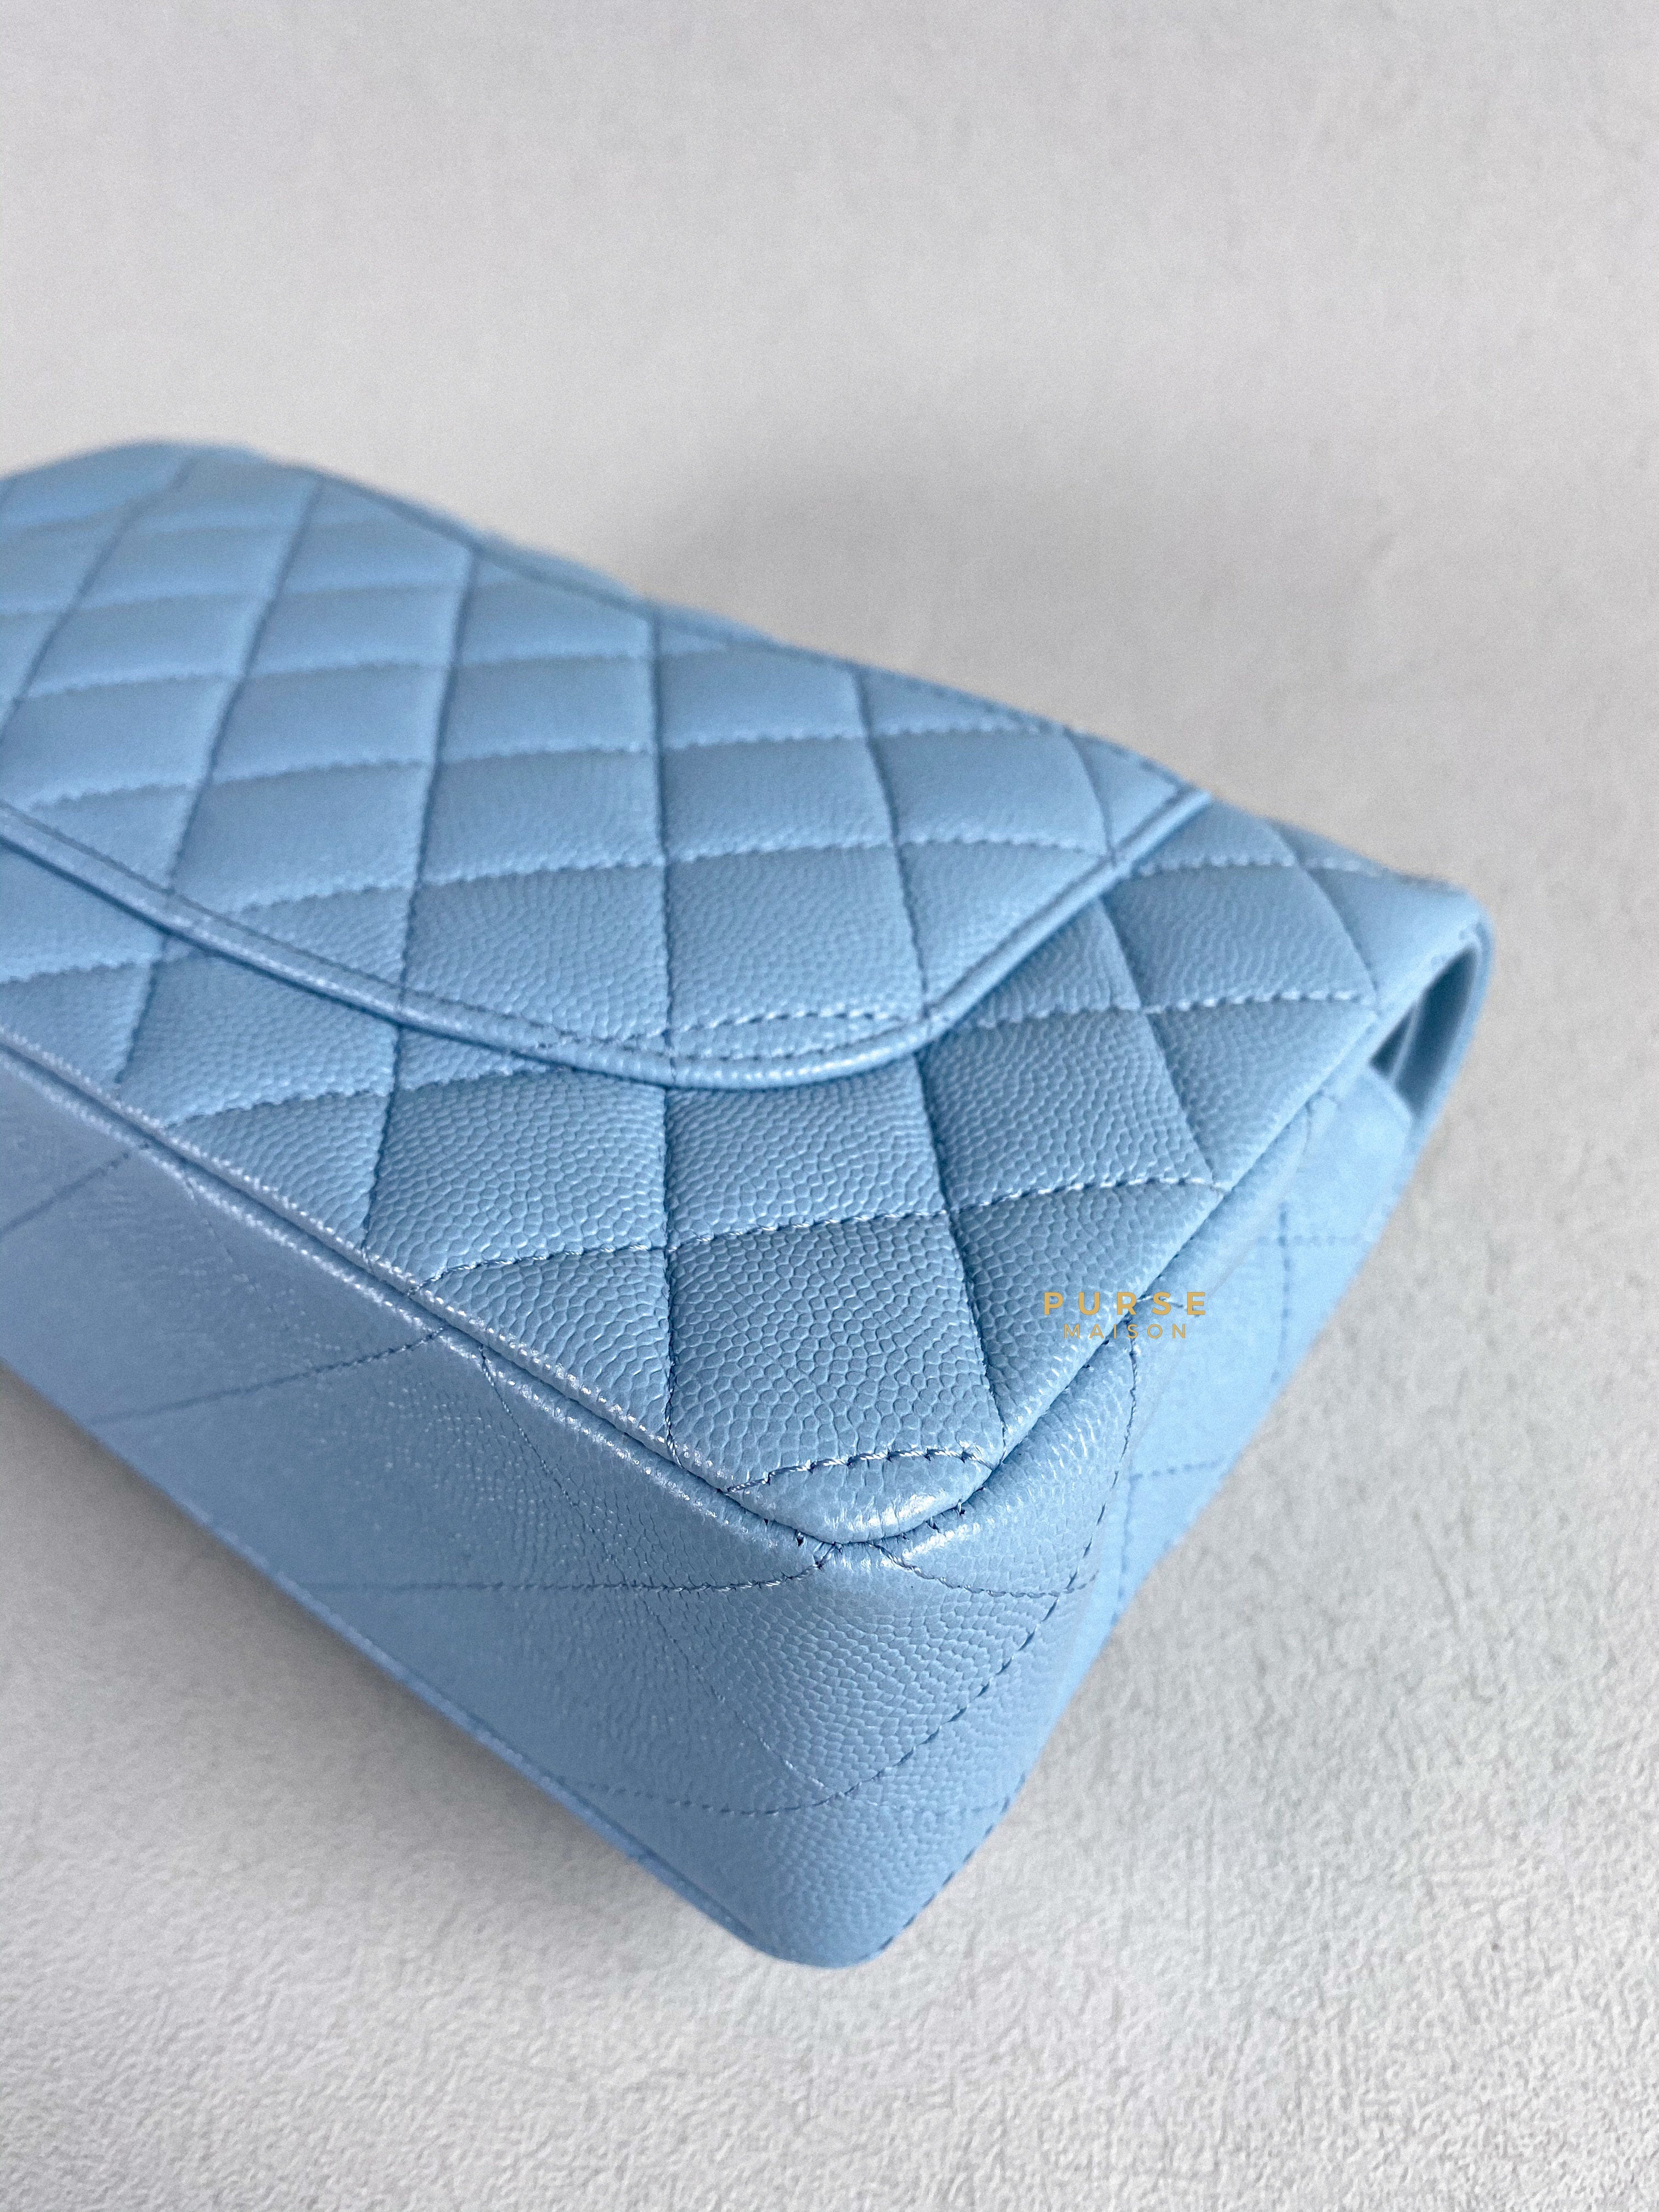 Chanel 22s Baby Blue Classic Double Flap Small Caviar Light Gold hardware (Microchip) | Purse Maison Luxury Bags Shop